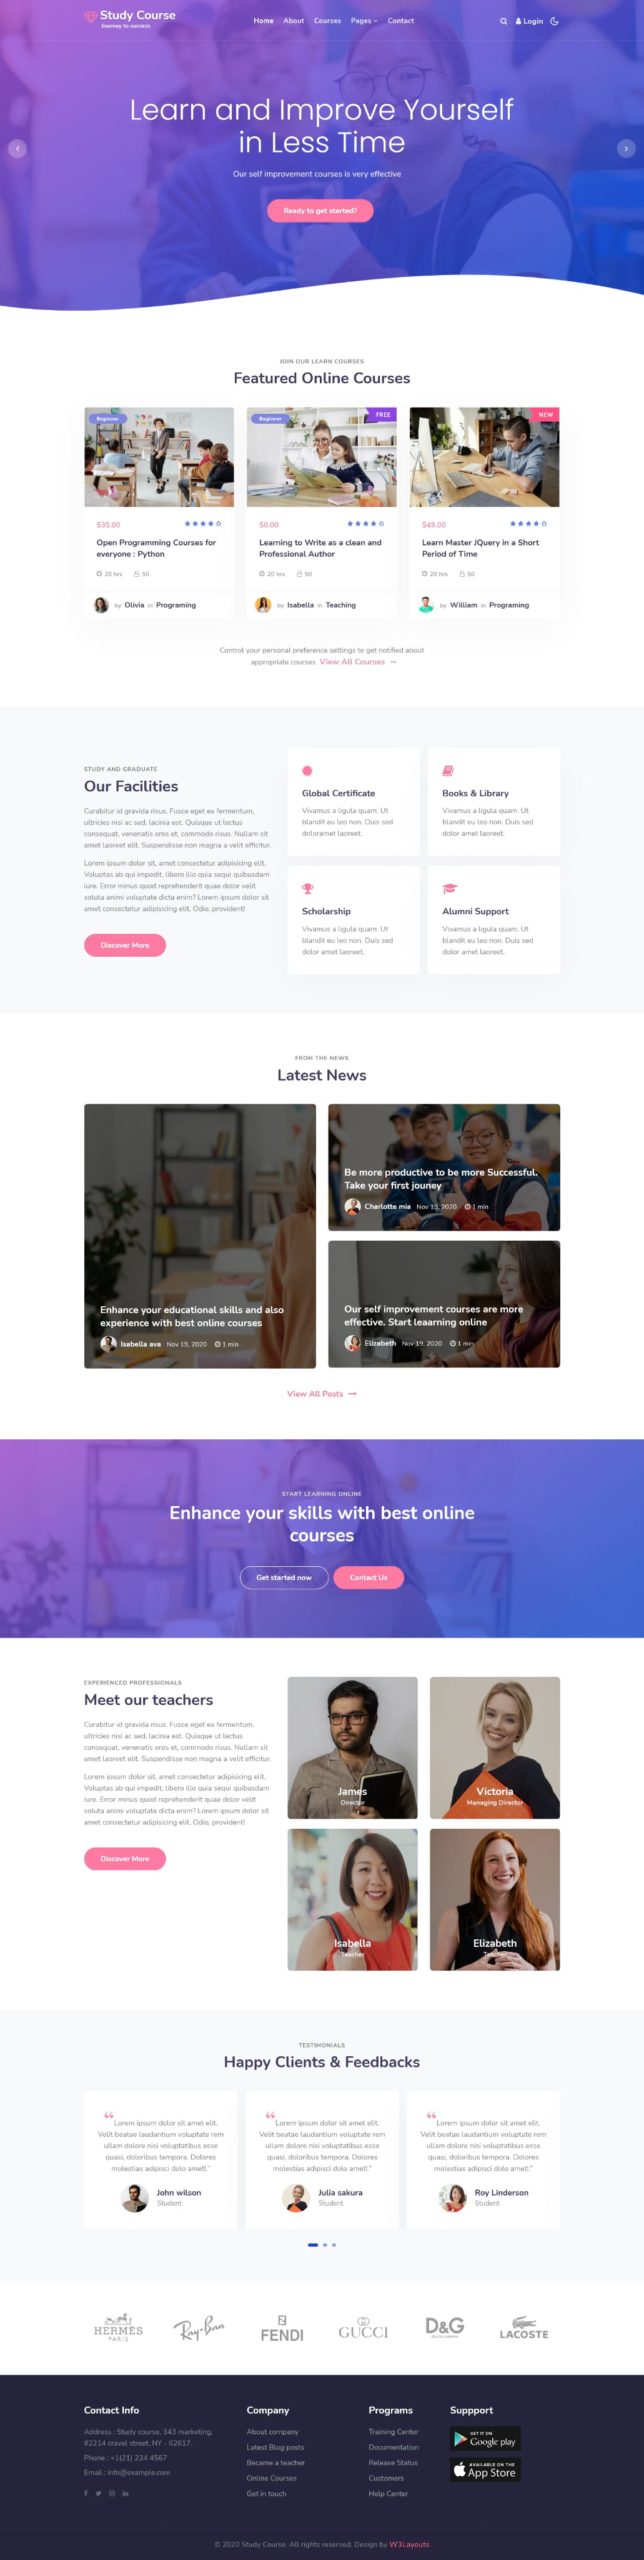 consultant online education website template home page